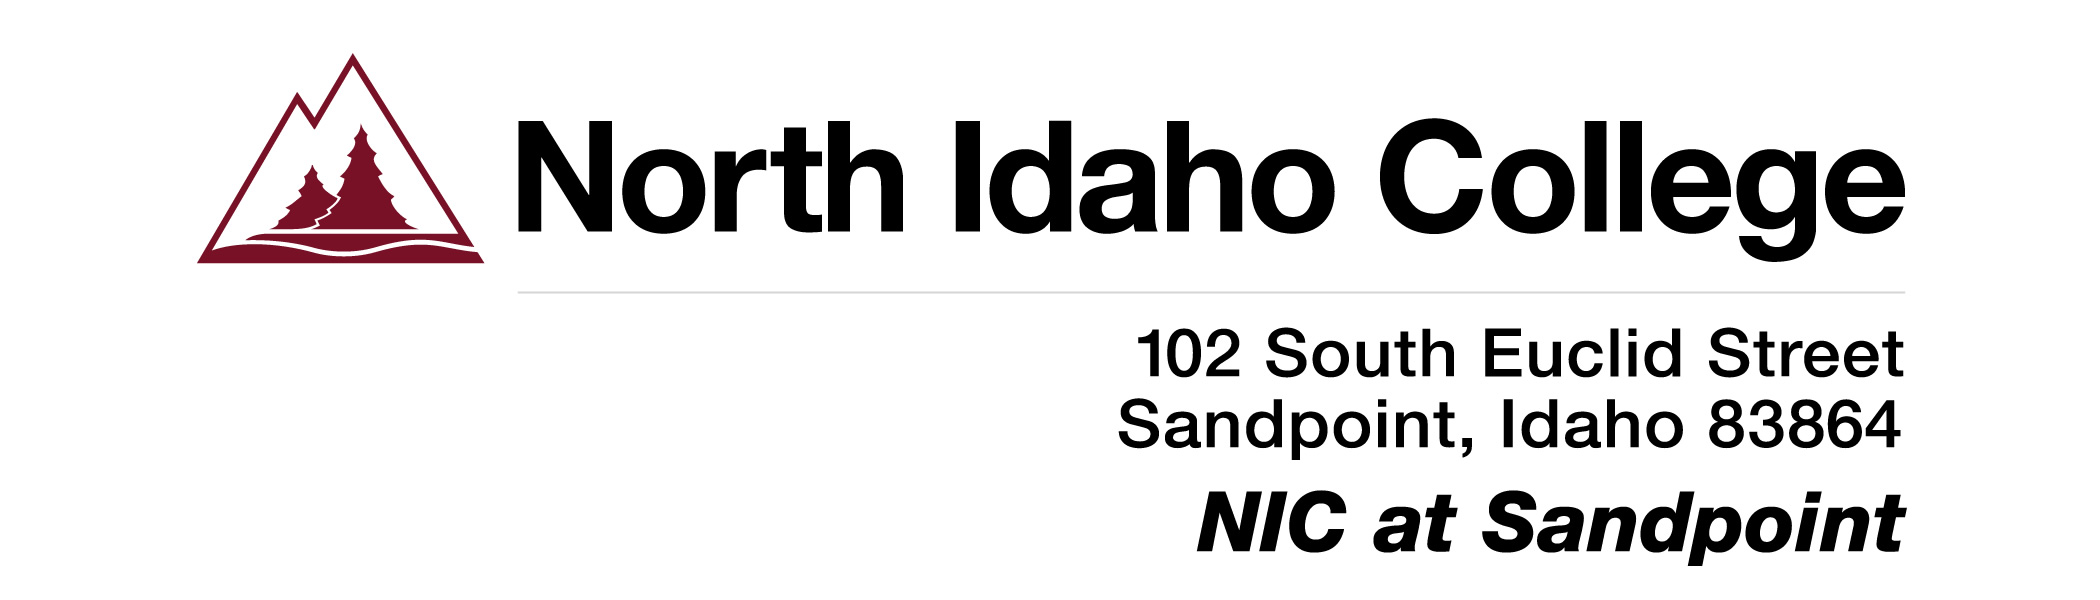 NIC Logo with Sandpoint Outreach Center and address